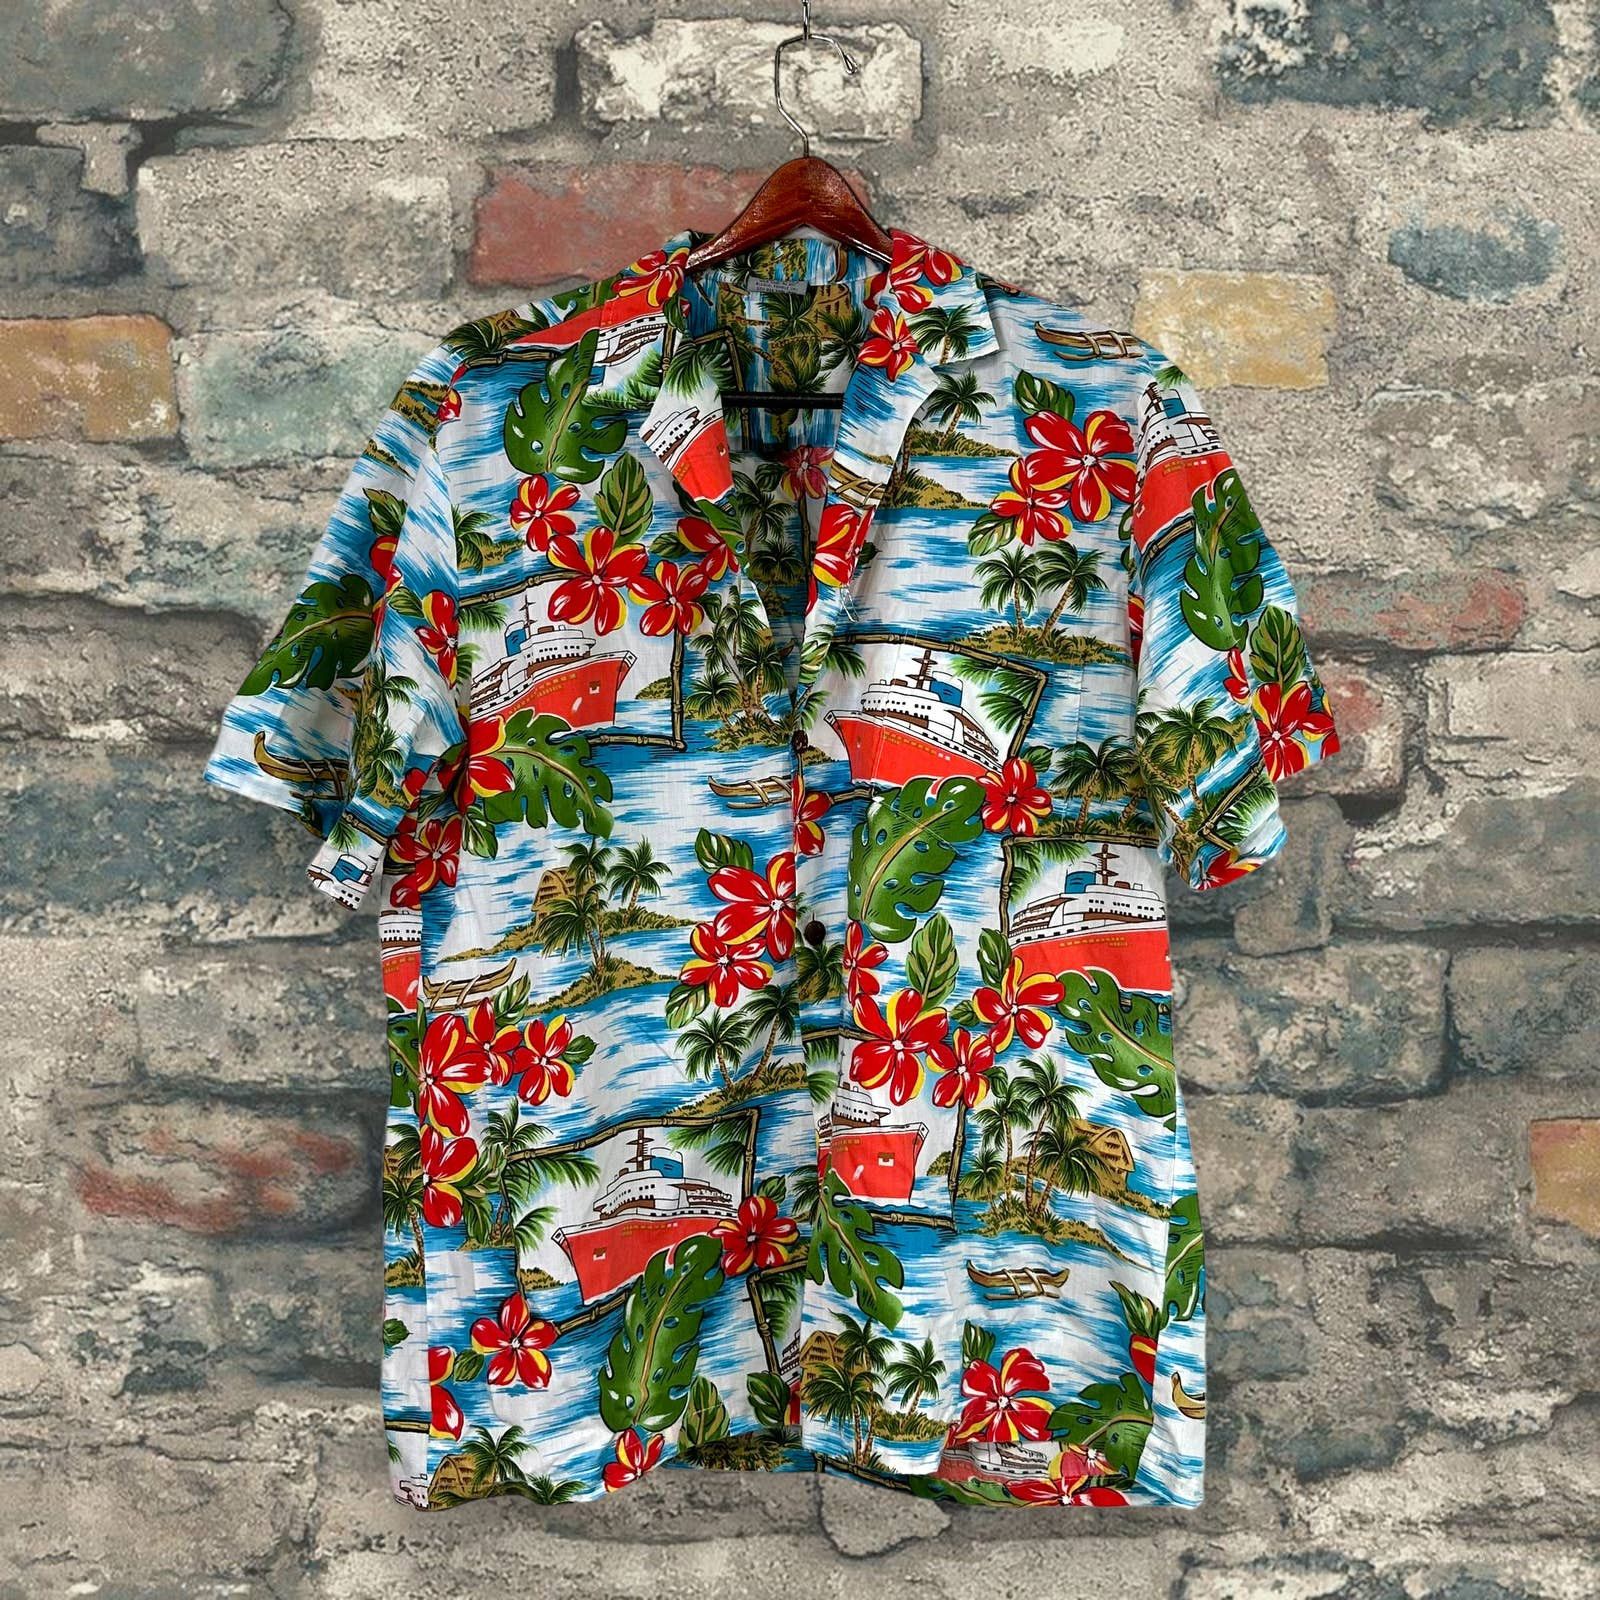 Vintage Vintage Hawaiian Shirt Made in Hawaii Button Up Collared 90s Size US XL / EU 56 / 4 - 1 Preview